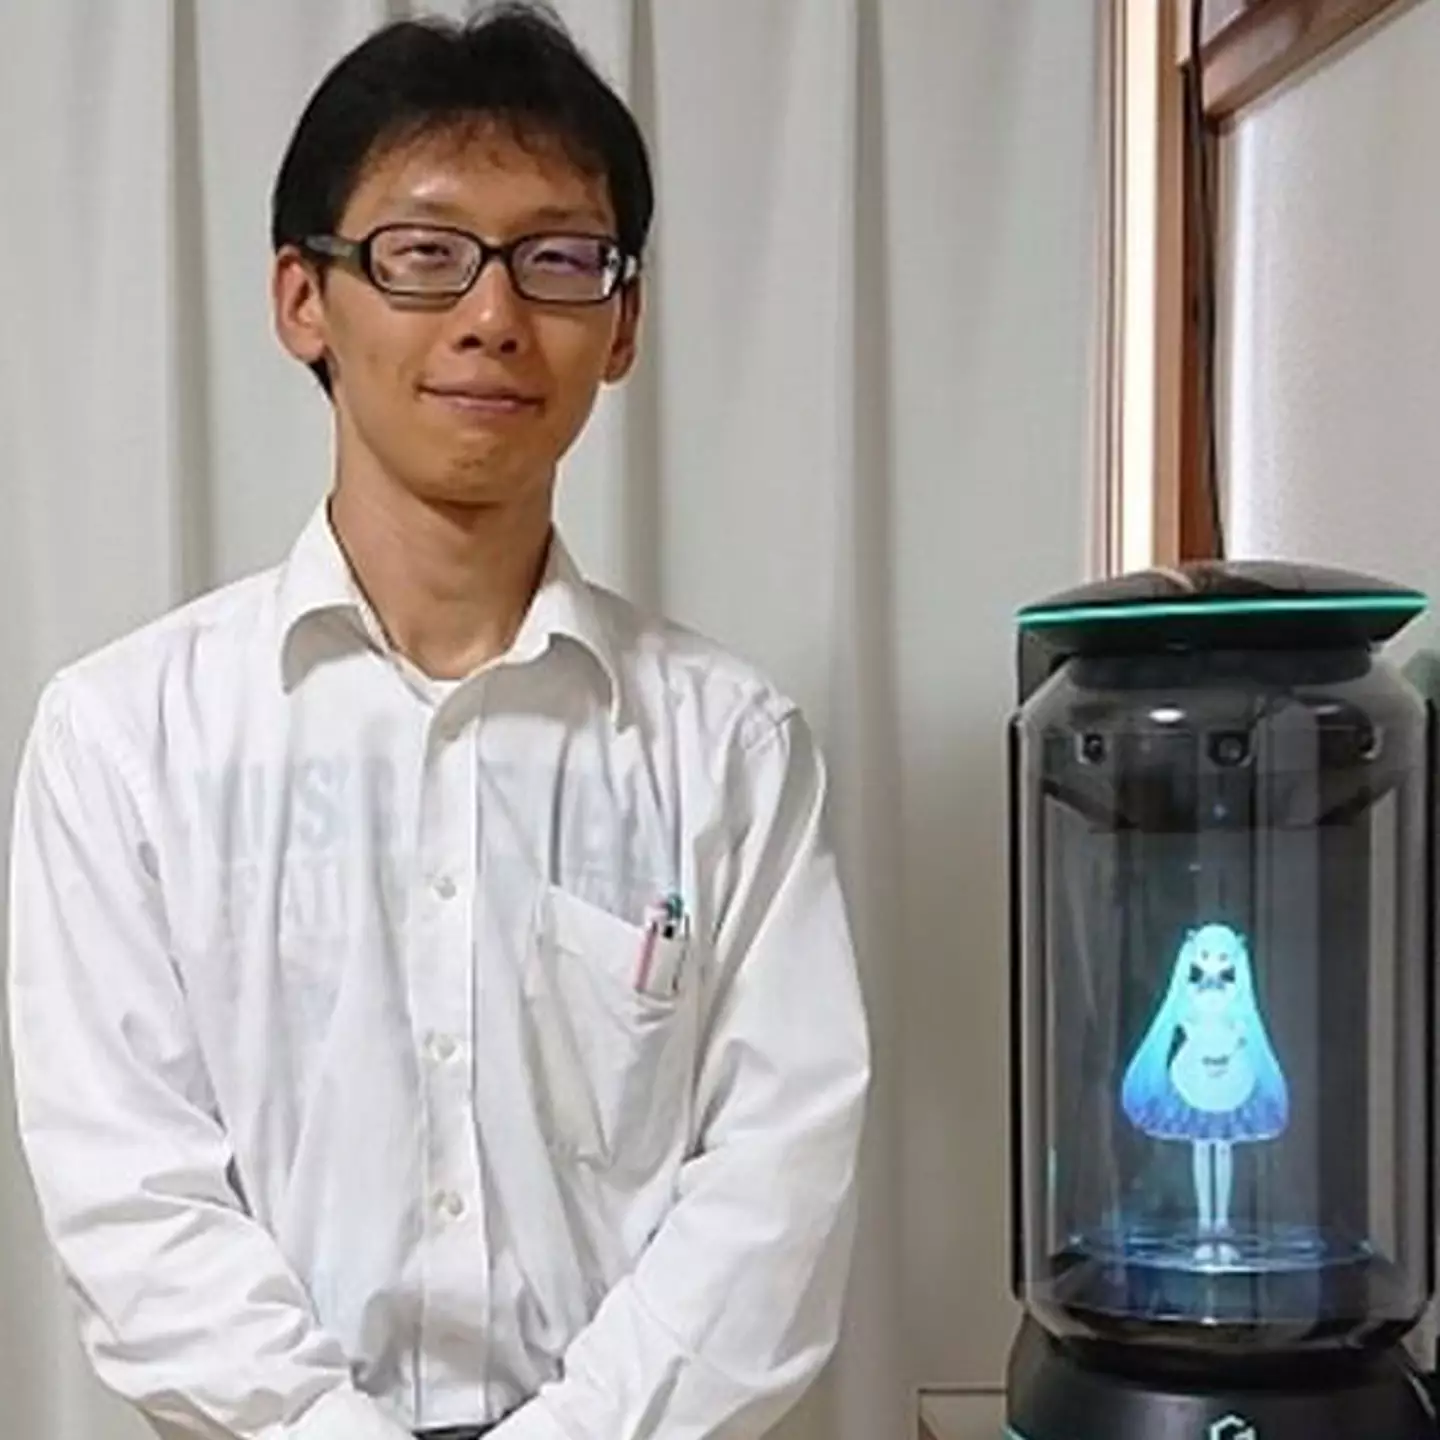 Man who married a hologram can no longer communicate with his virtual wife after 3 years together